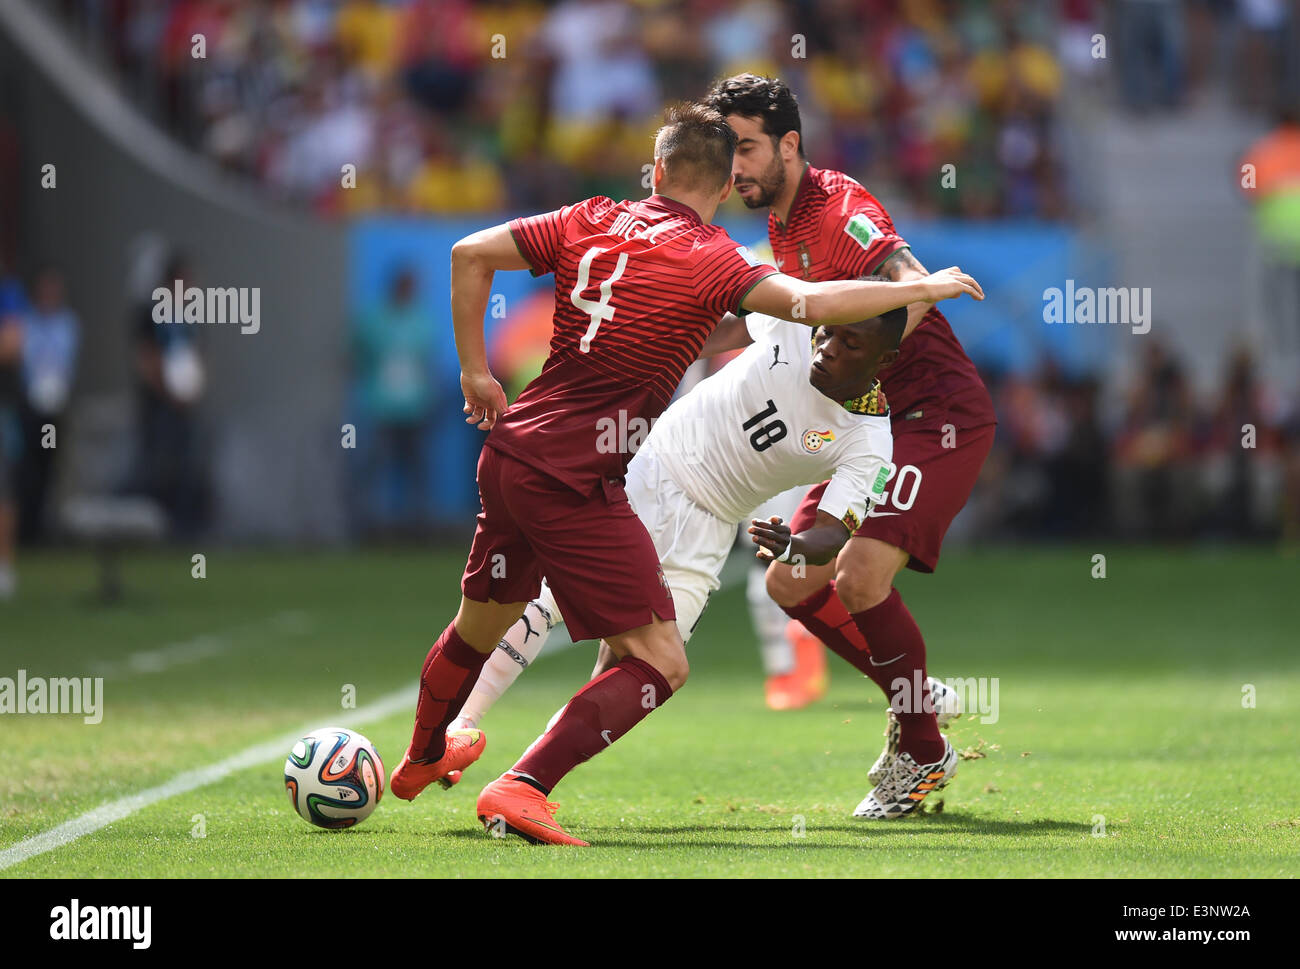 Brasilia, Brazil. 26th June, 2014. Majeed Waris (C) of Ghana in action against Miguel Veloso (L) and Ruben Amorim of Portugal during the FIFA World Cup 2014 group G preliminary round match between Portugal and Ghana at the Estadio National Stadium in Brasilia, Brazil, on 26 June 2014 Credit: © dpa picture alliance/Alamy Live News  Stock Photo